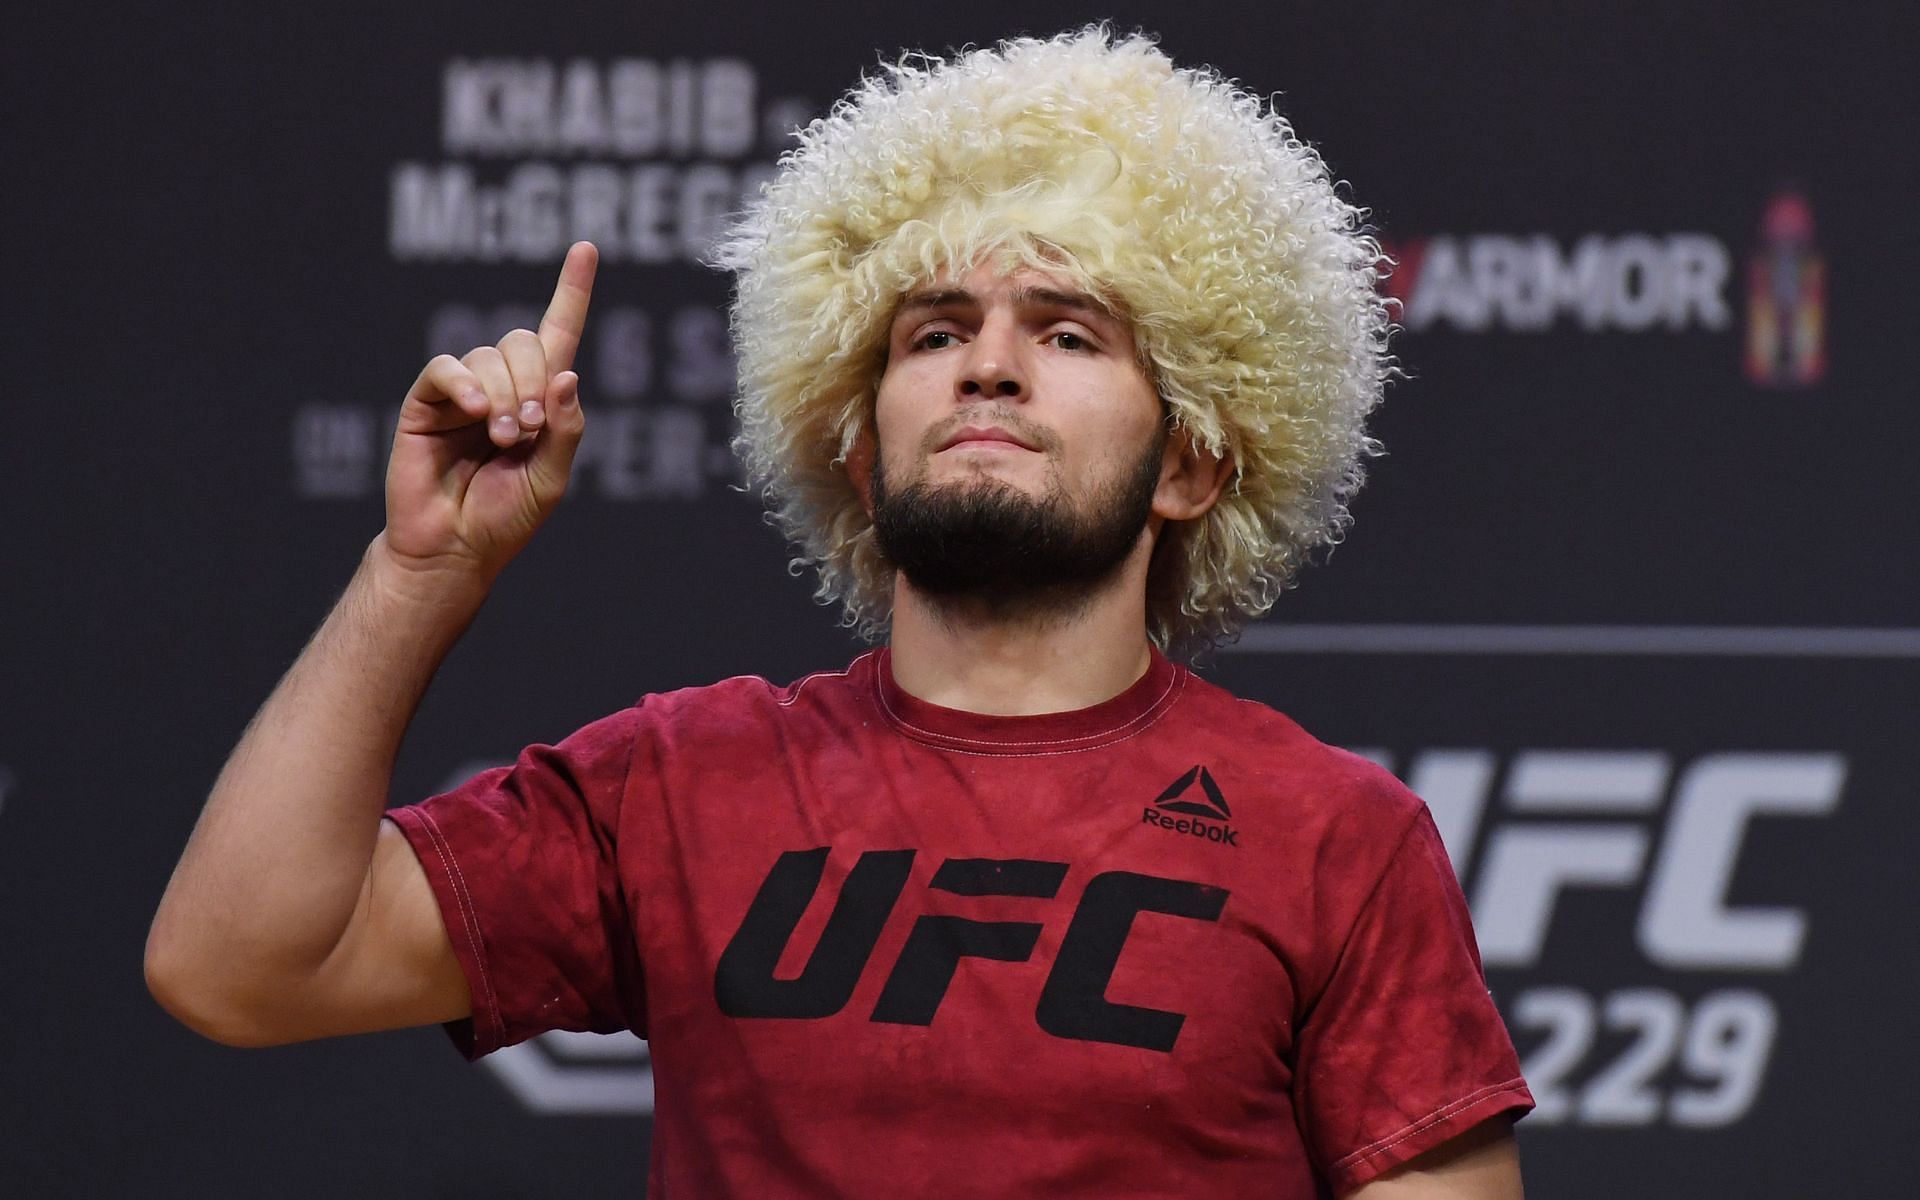 Khabib Nurmagomedov is regarded as one of the greatest MMA fighters ever